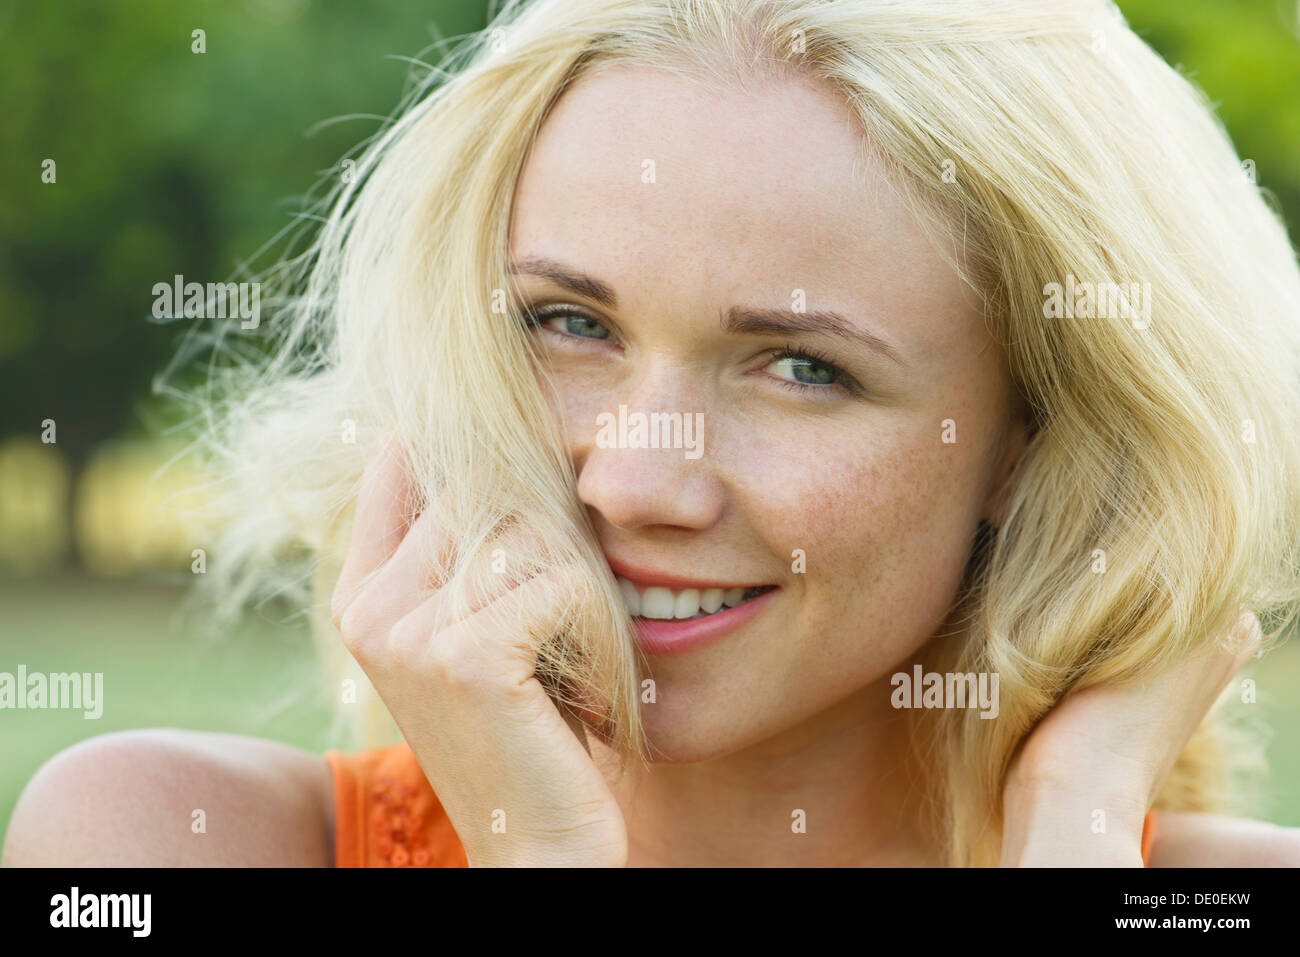 Young woman with hands in hair, smiling, portrait Stock Photo